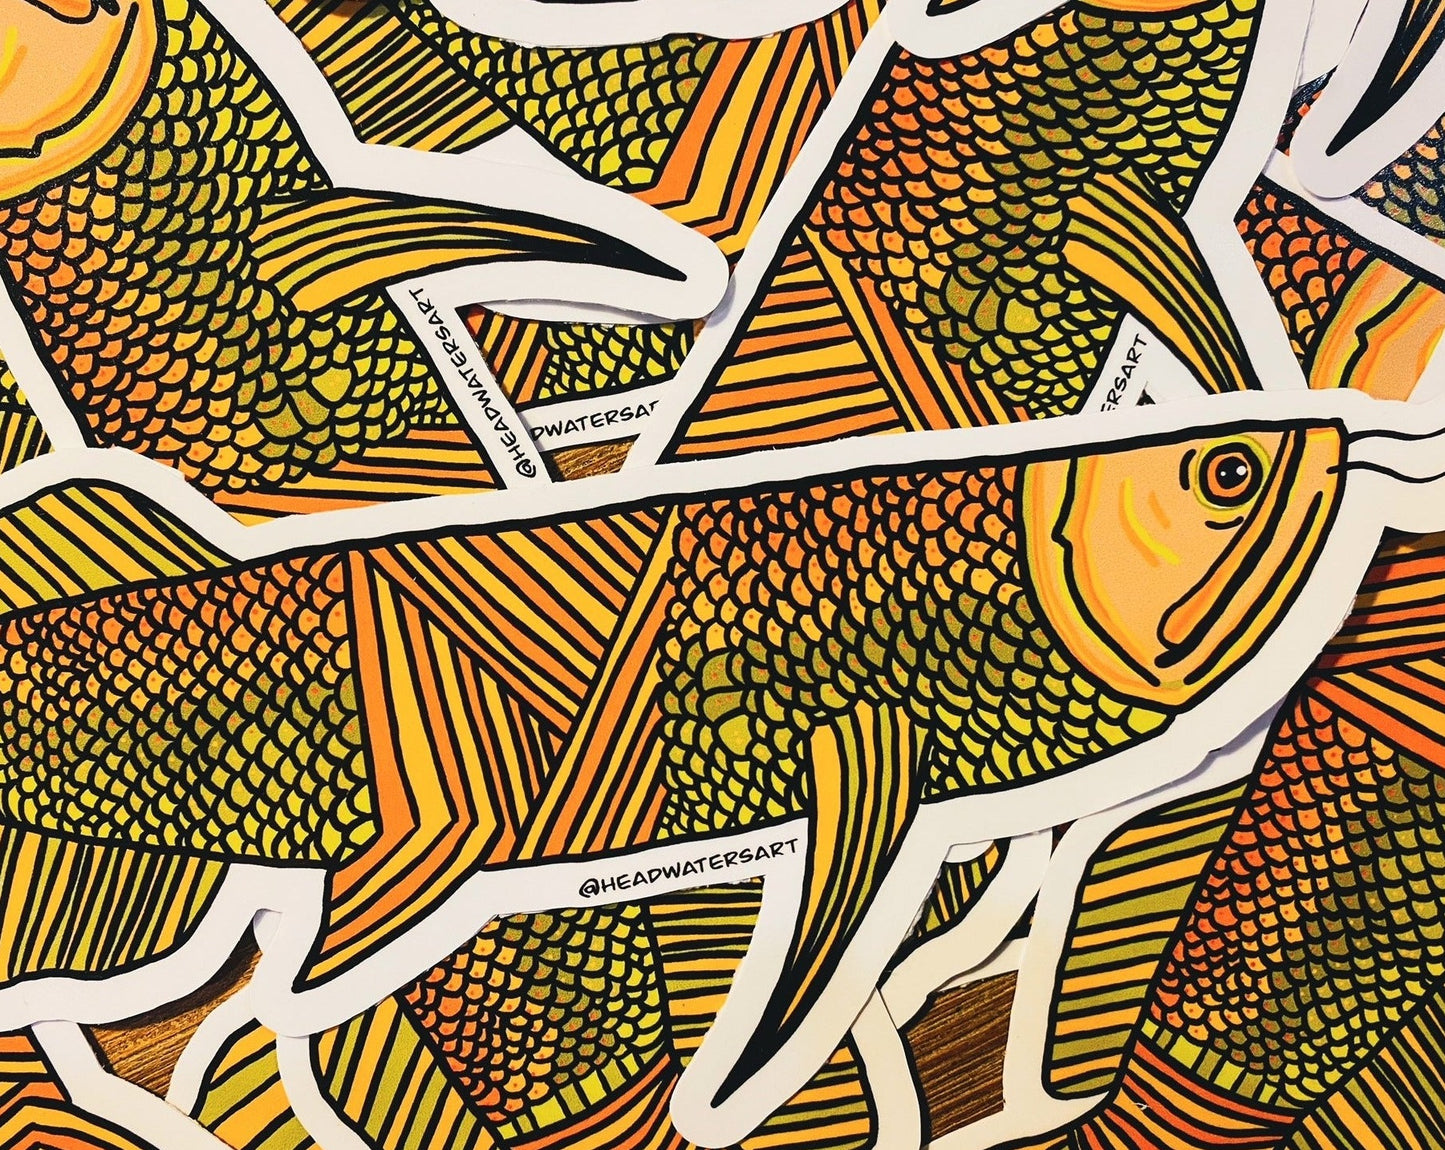 Saratoga artwork featuring hand-drawn art by Justin Webber. All fish measure approximately 120mm and 250mm. Premium vinyl stickers, specially laminated to resist the elements.